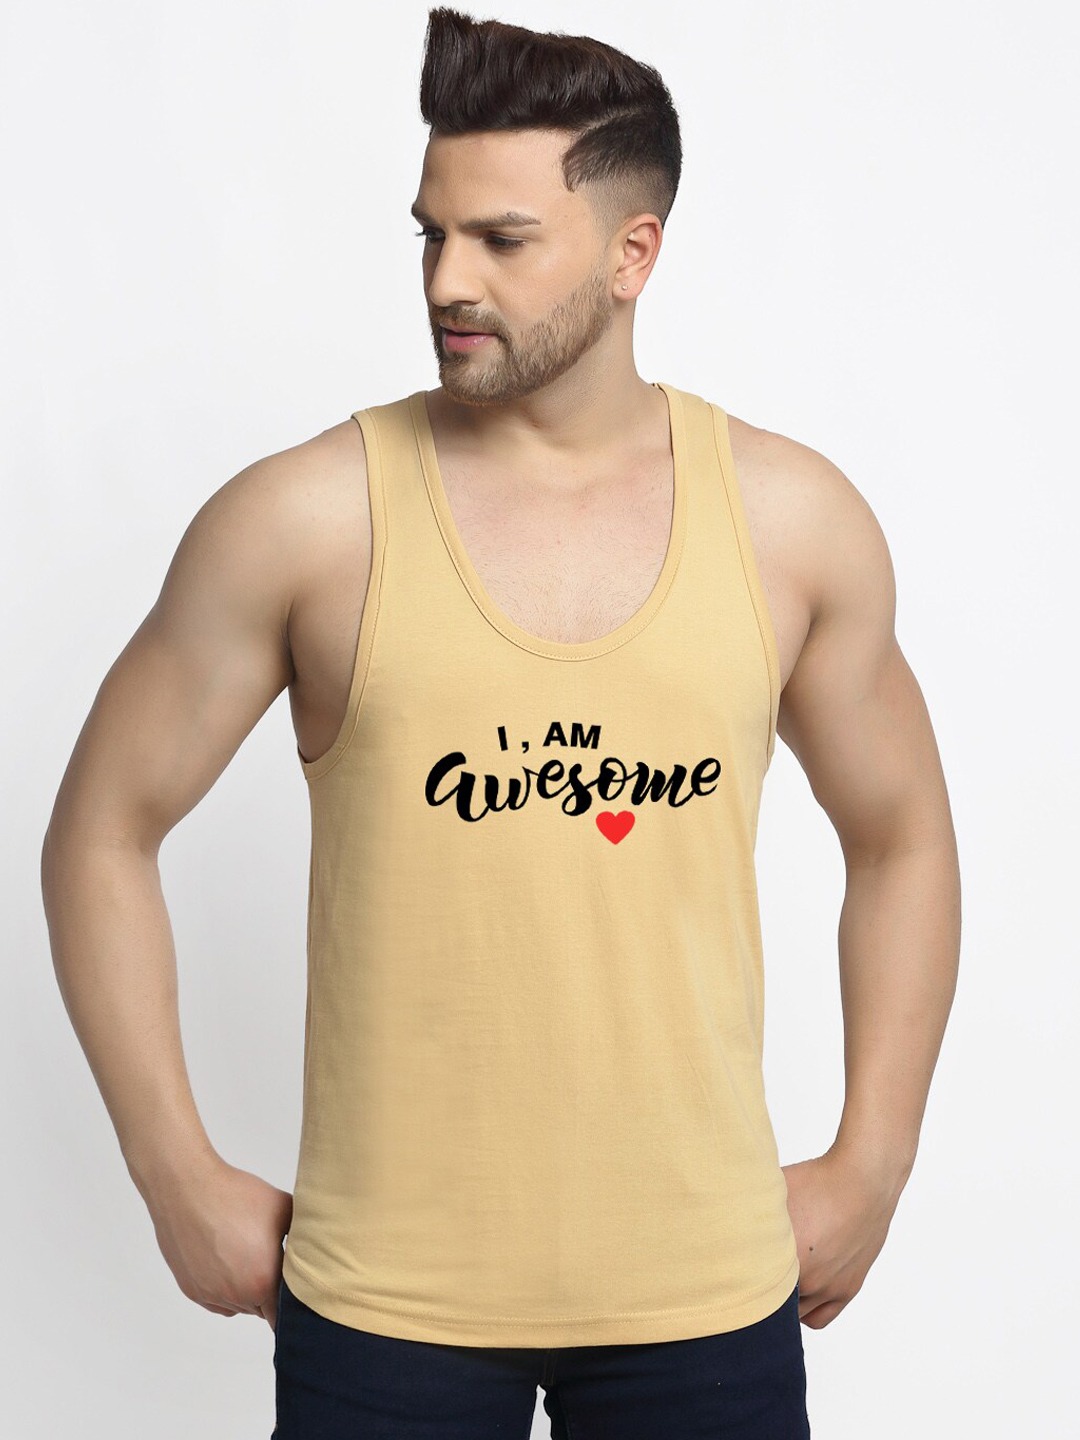 Clothing Innerwear Vests | Friskers Men Beige & Black I Am Awesome Printed Pure Cotton Apple Cut Innerwear Vest C232-09 - MW28008